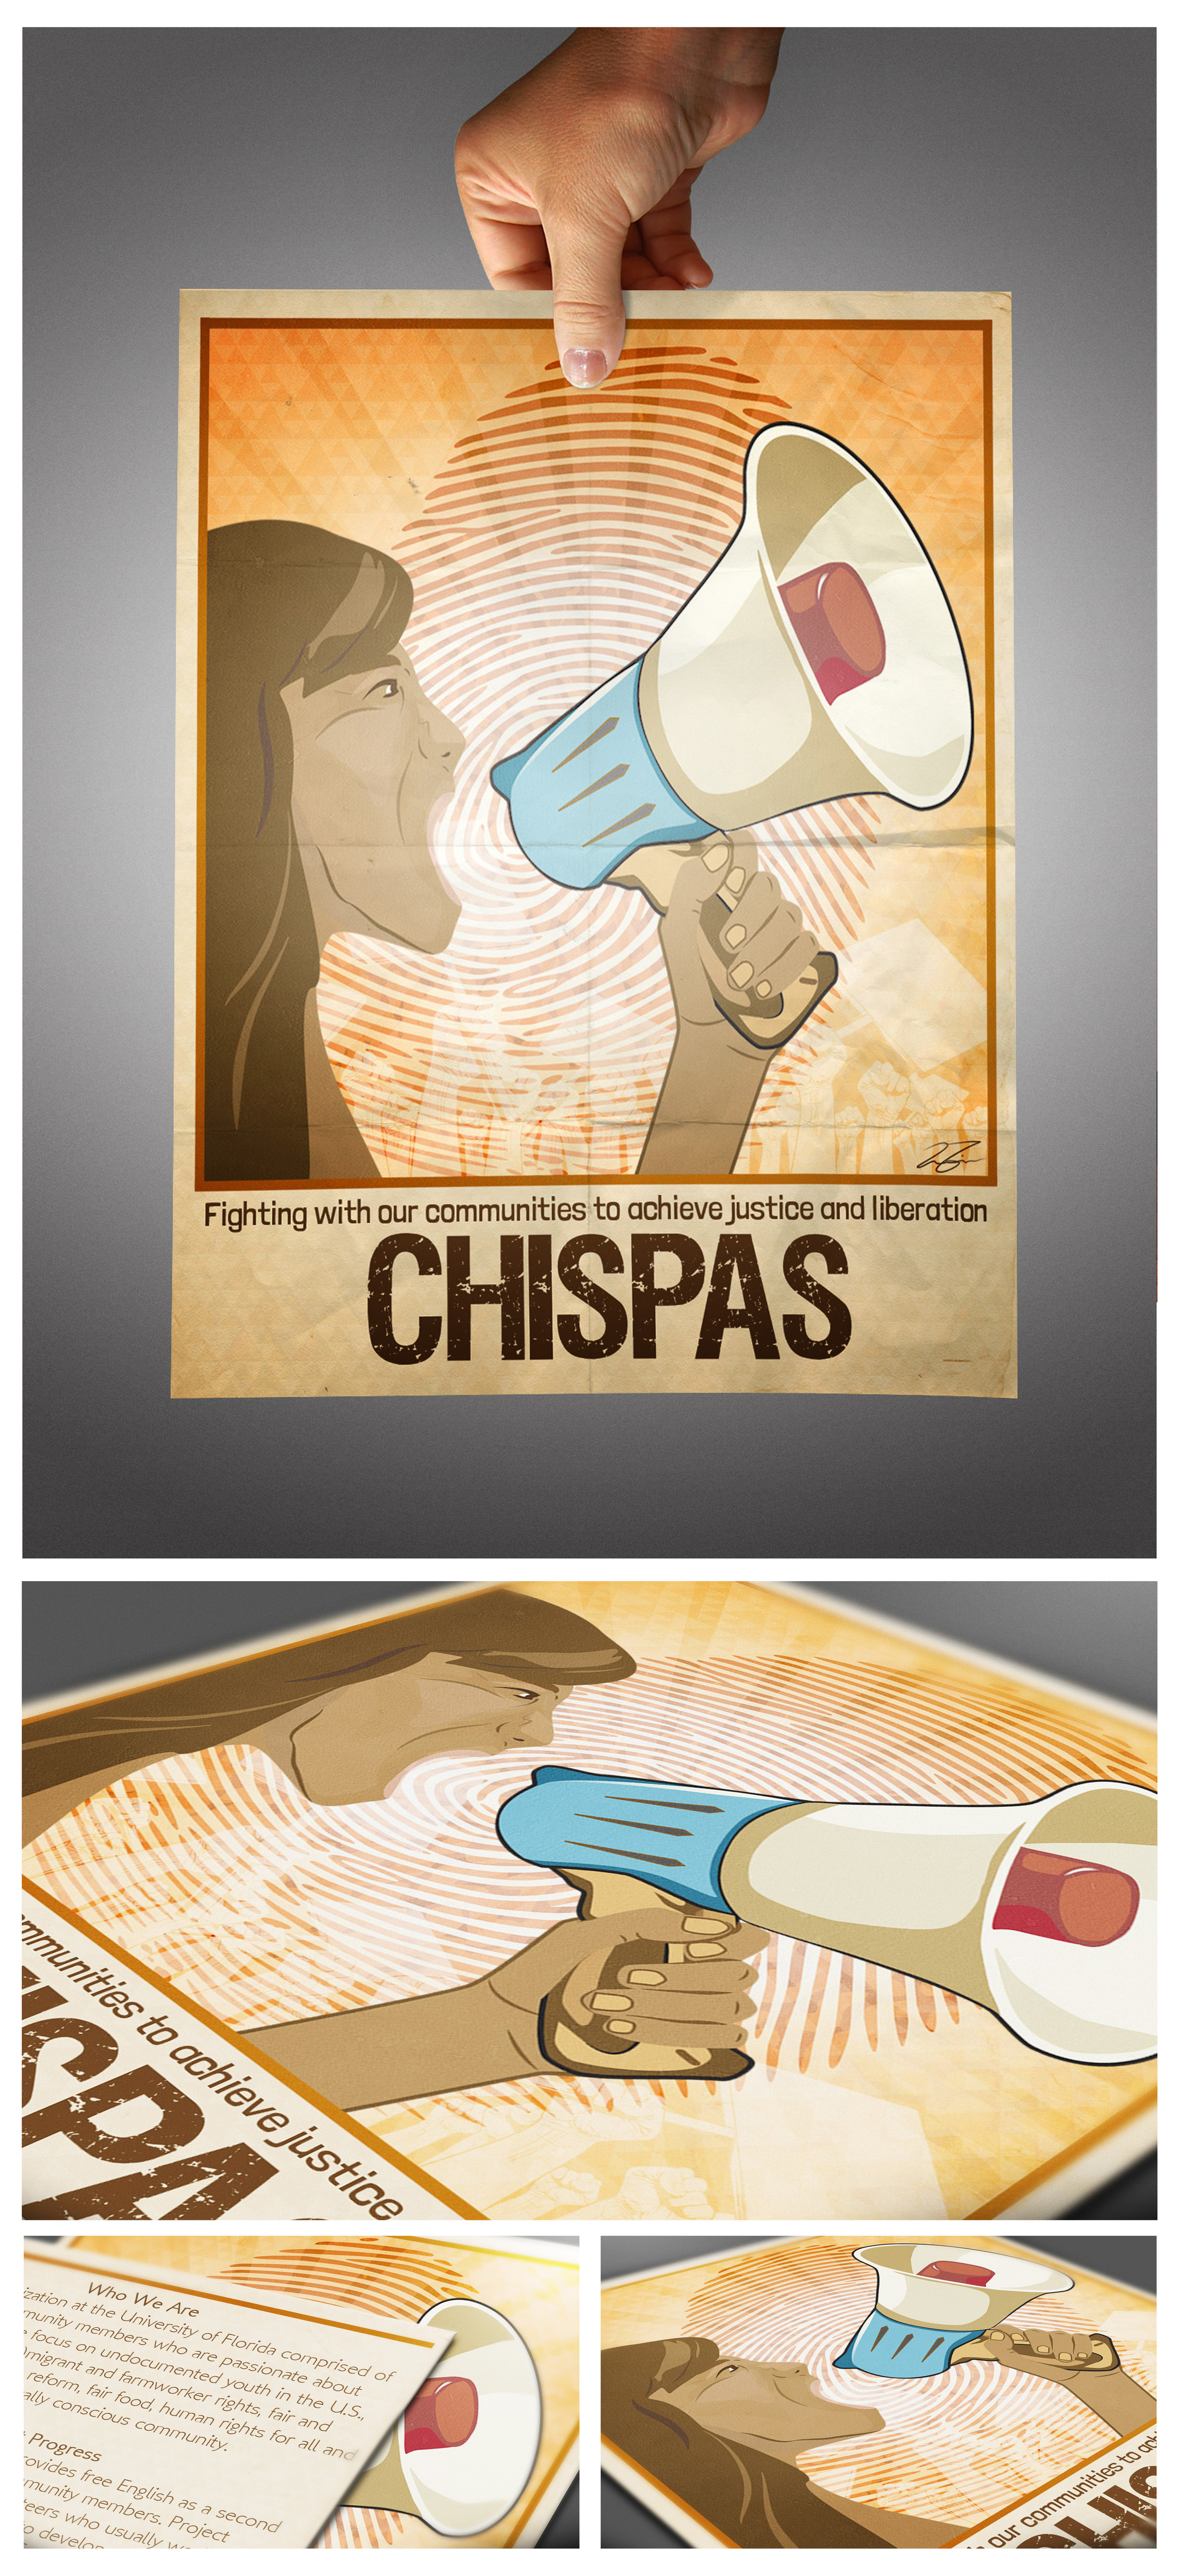  Client: CHISPAS at the University of Florida  Type: Flier 